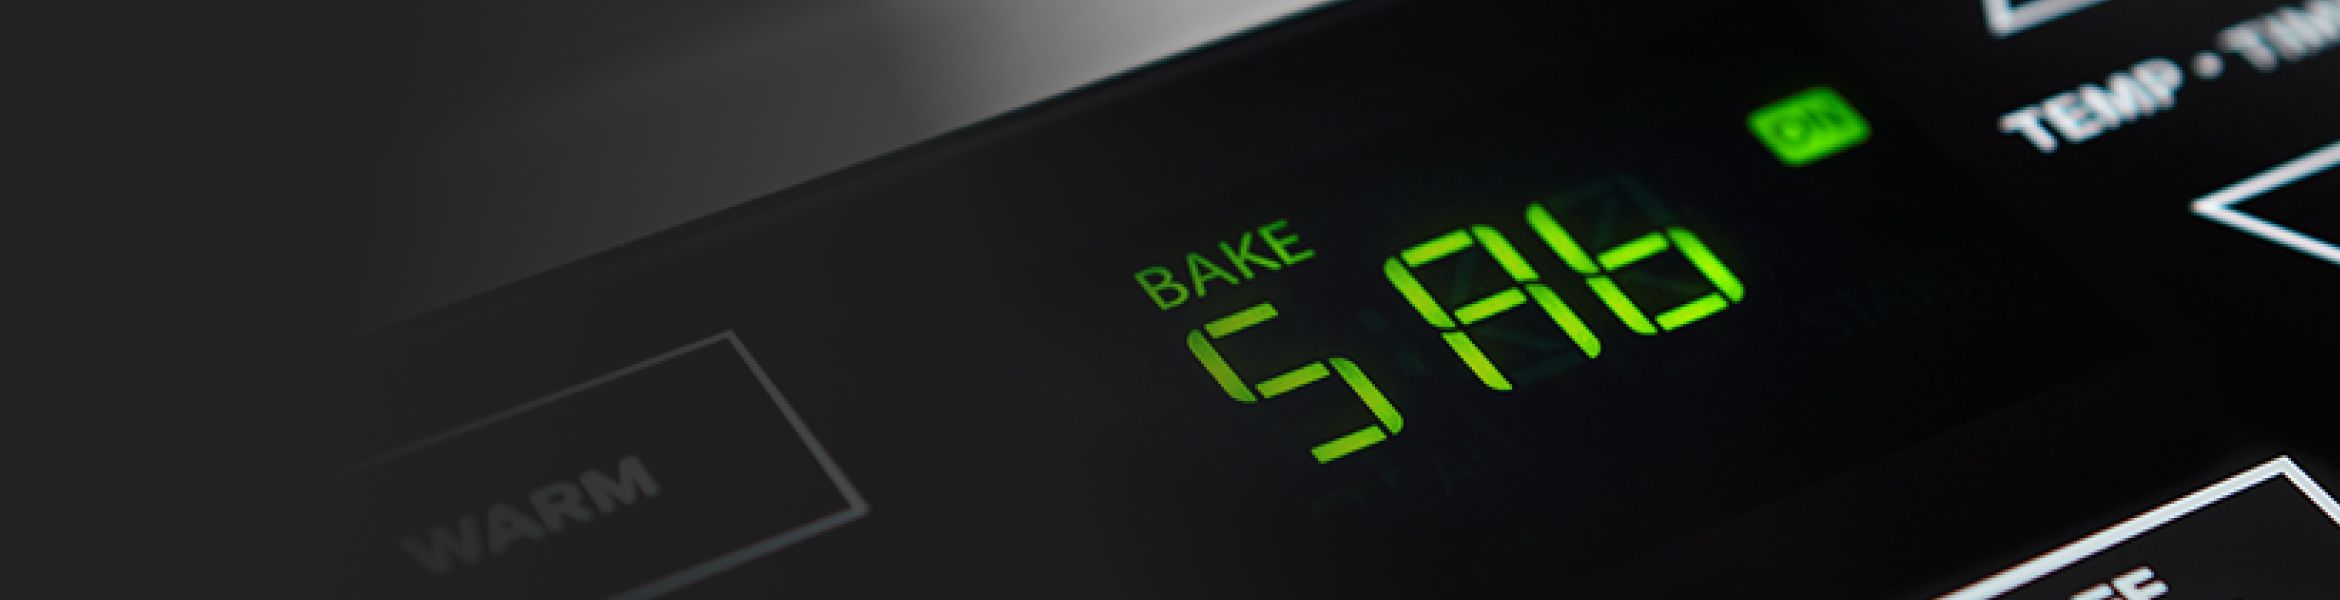 Sabbath Mode activated on an oven display.